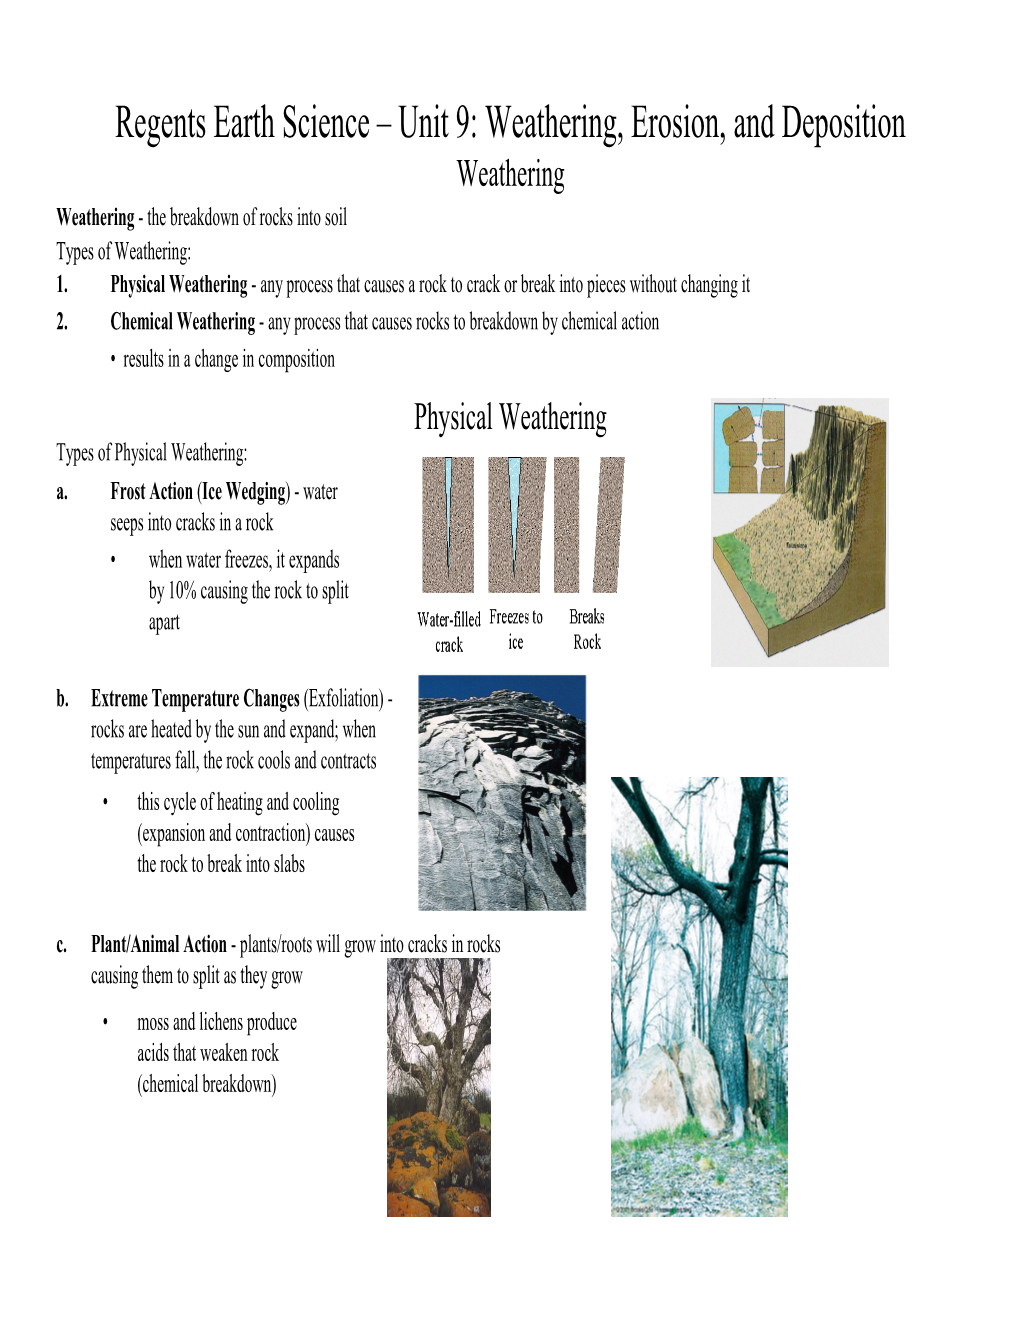 Weathering, Erosion, and Deposition Weathering Weathering - the Breakdown of Rocks Into Soil Types of Weathering: 1